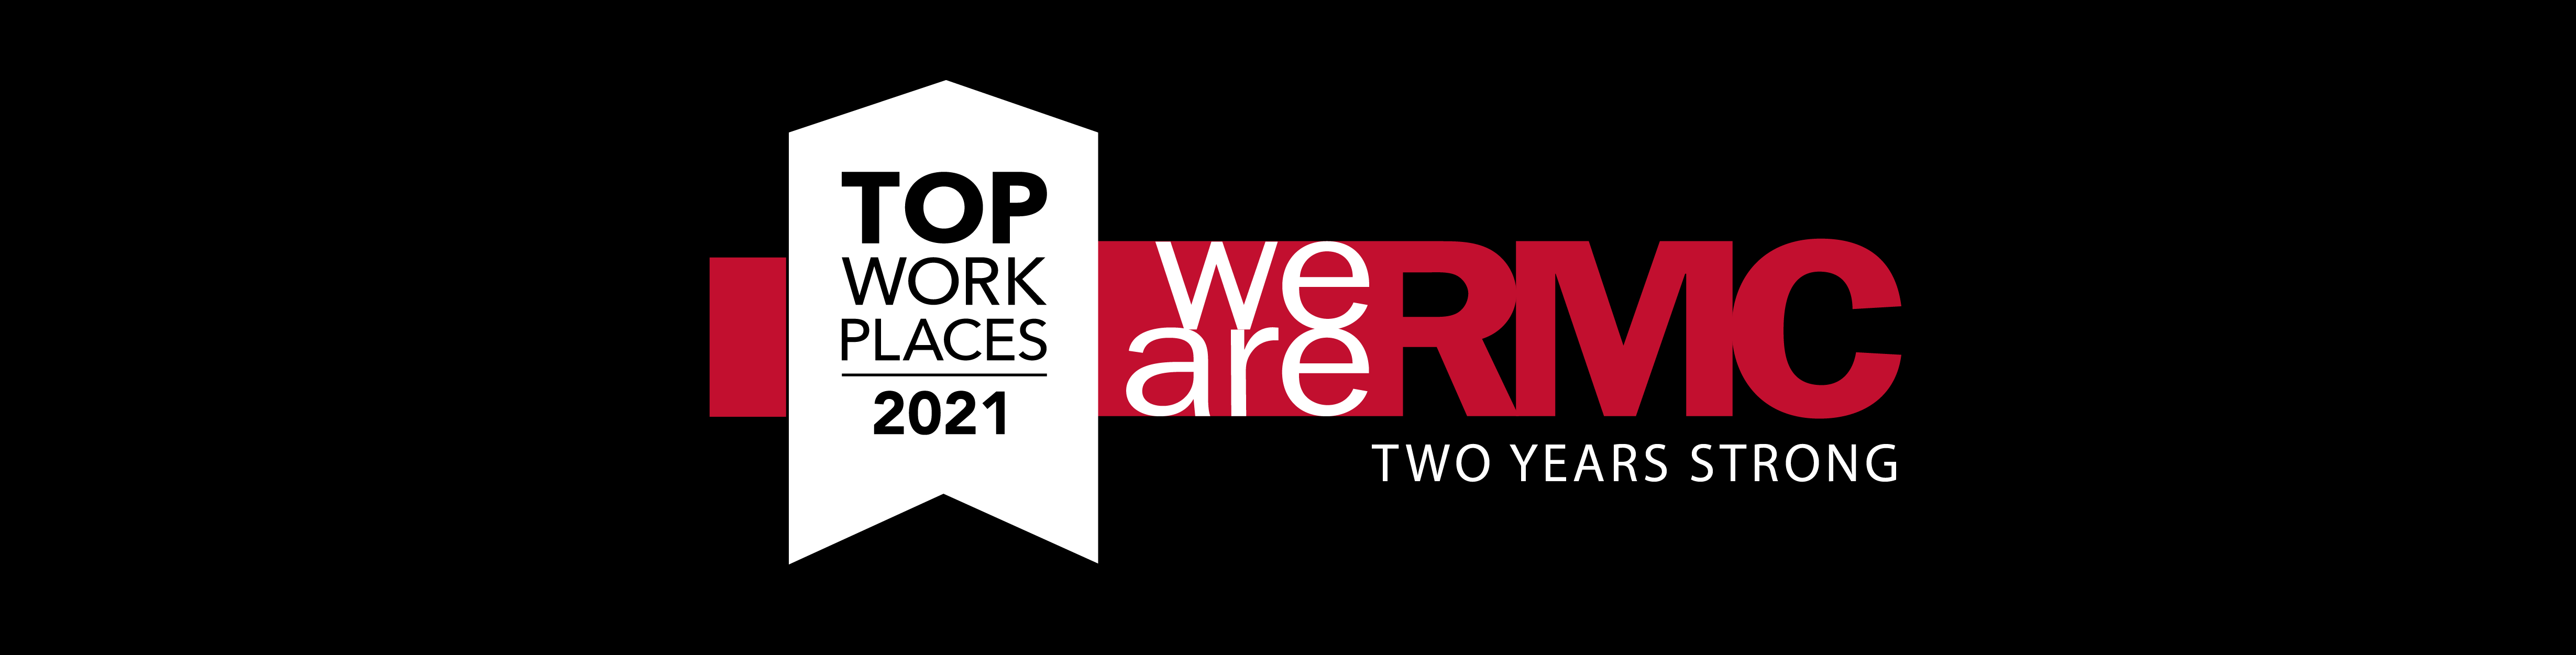 Top Workplace LinkedIn Cover 2021 RMC 01